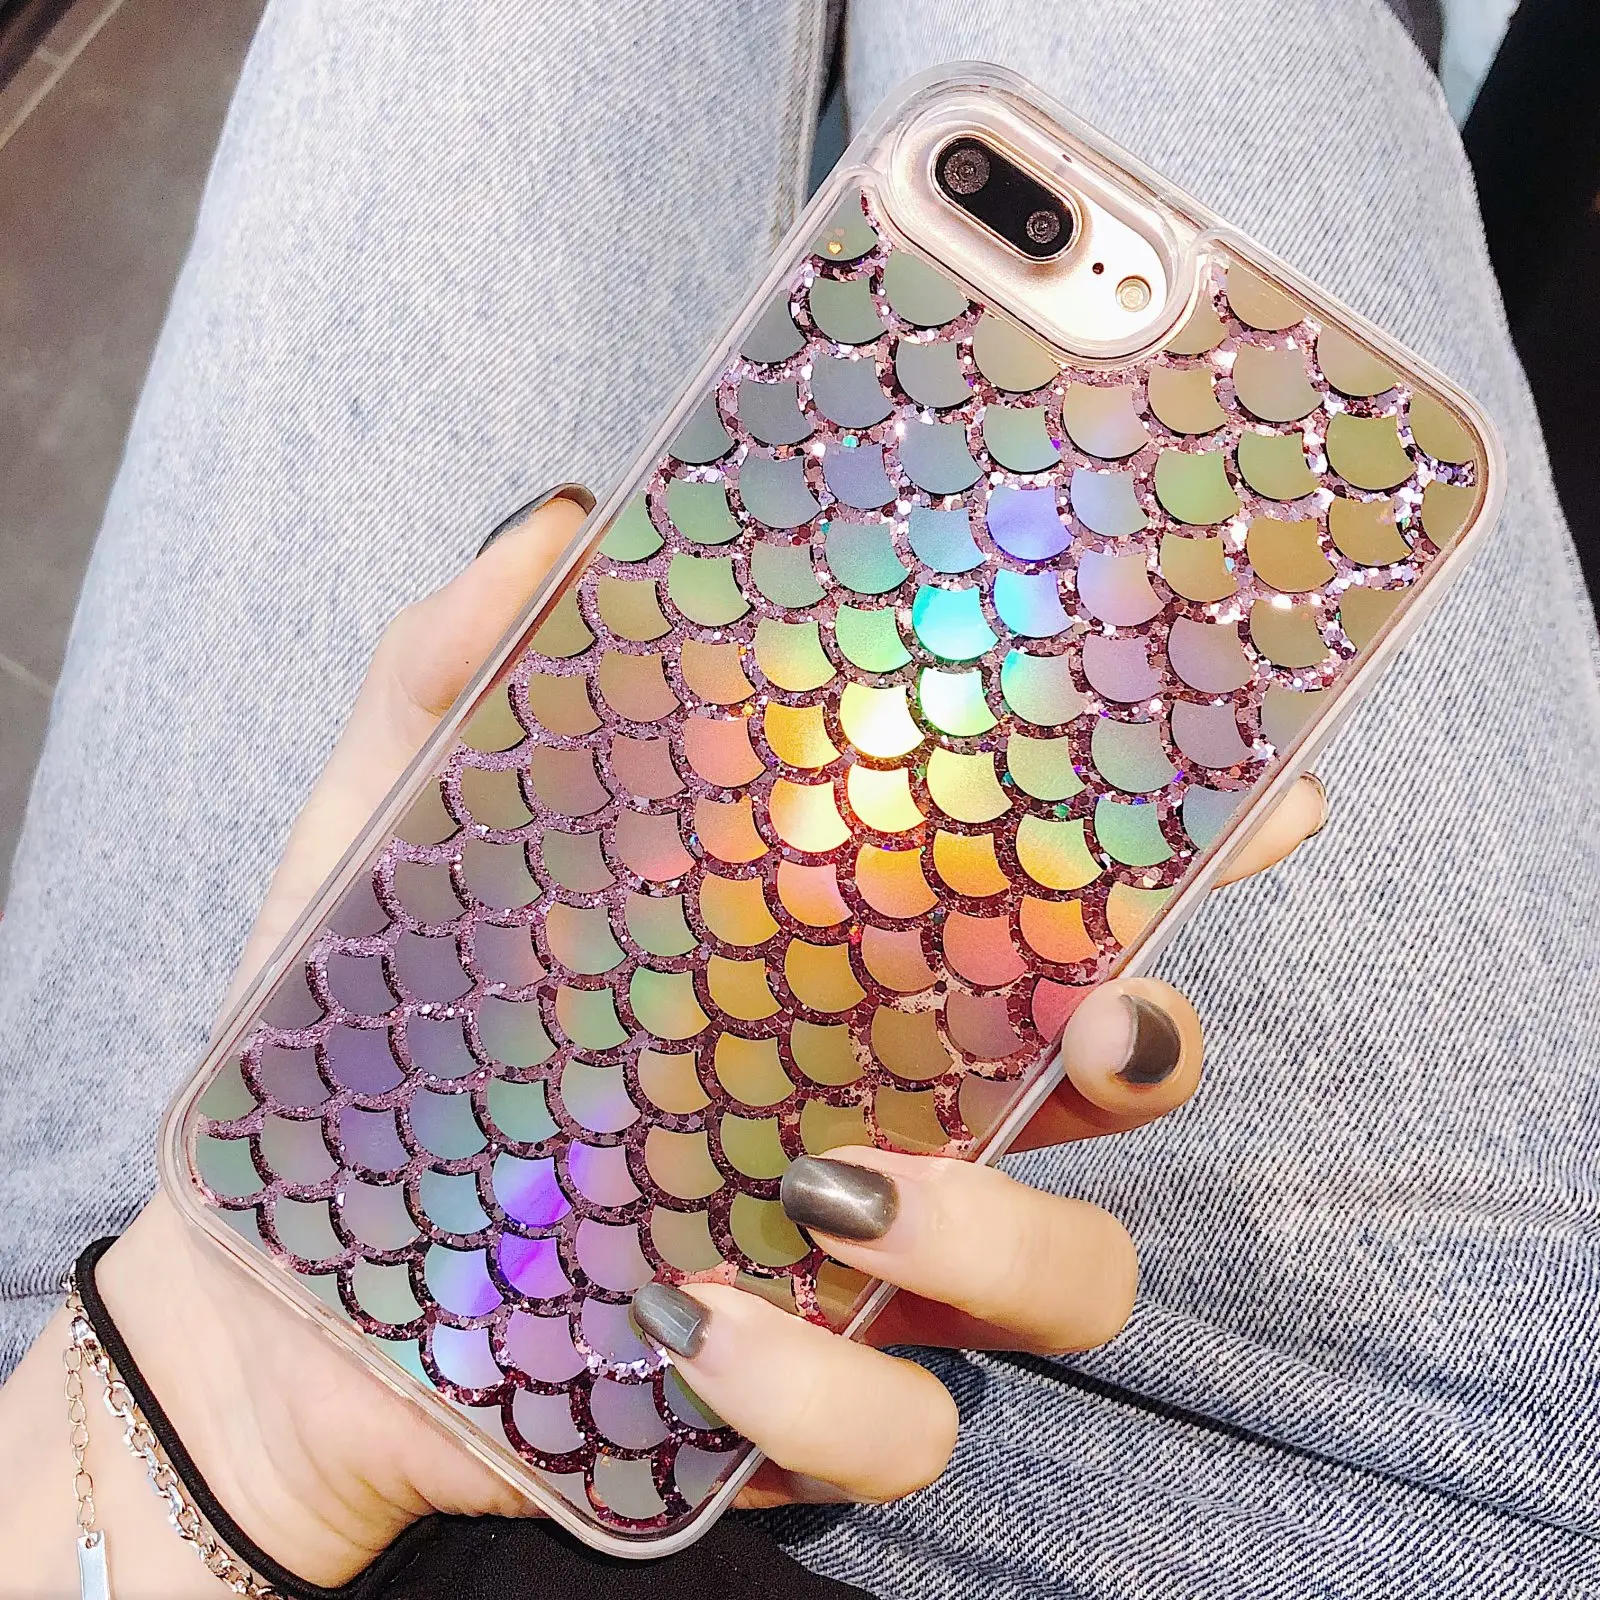 Bling Liquid Dynamic Quicksand Laser Mermaid Fish Scales Glitter Shinny Phone Cases For iPhone X XS MAX XR 7 8 6 6S Plus Cover